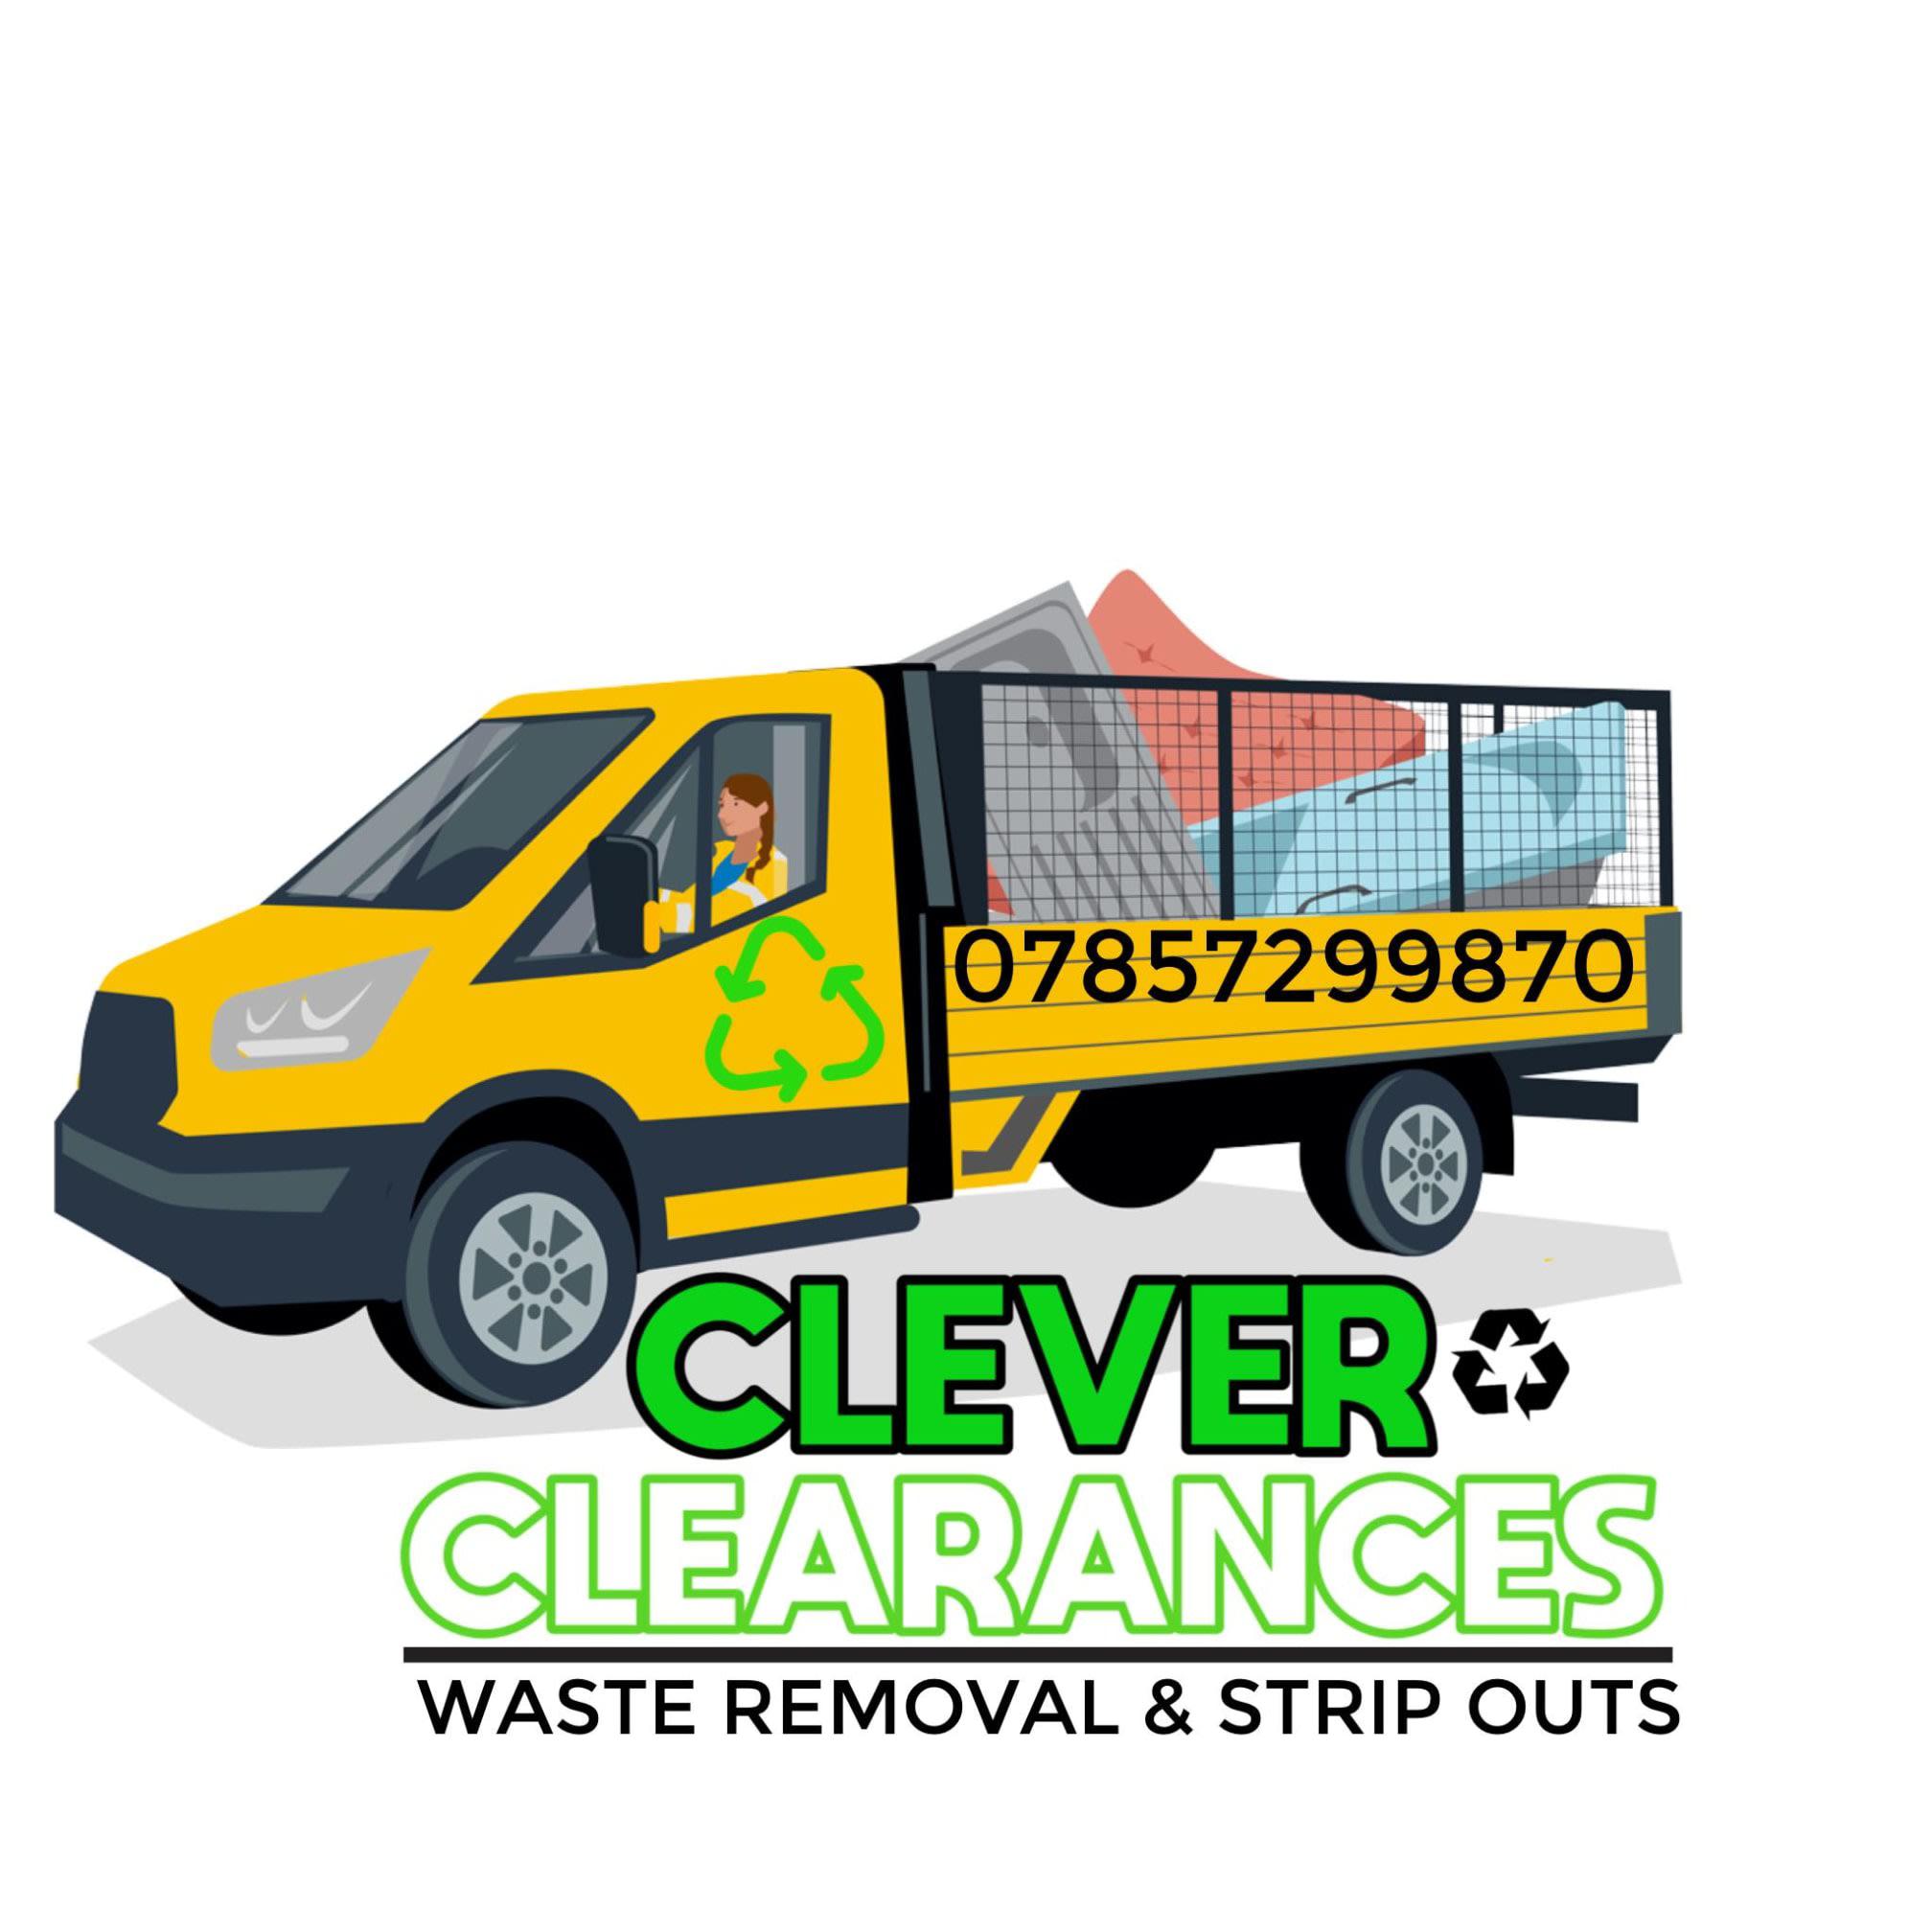 Images Clever Clearances Waste Removal